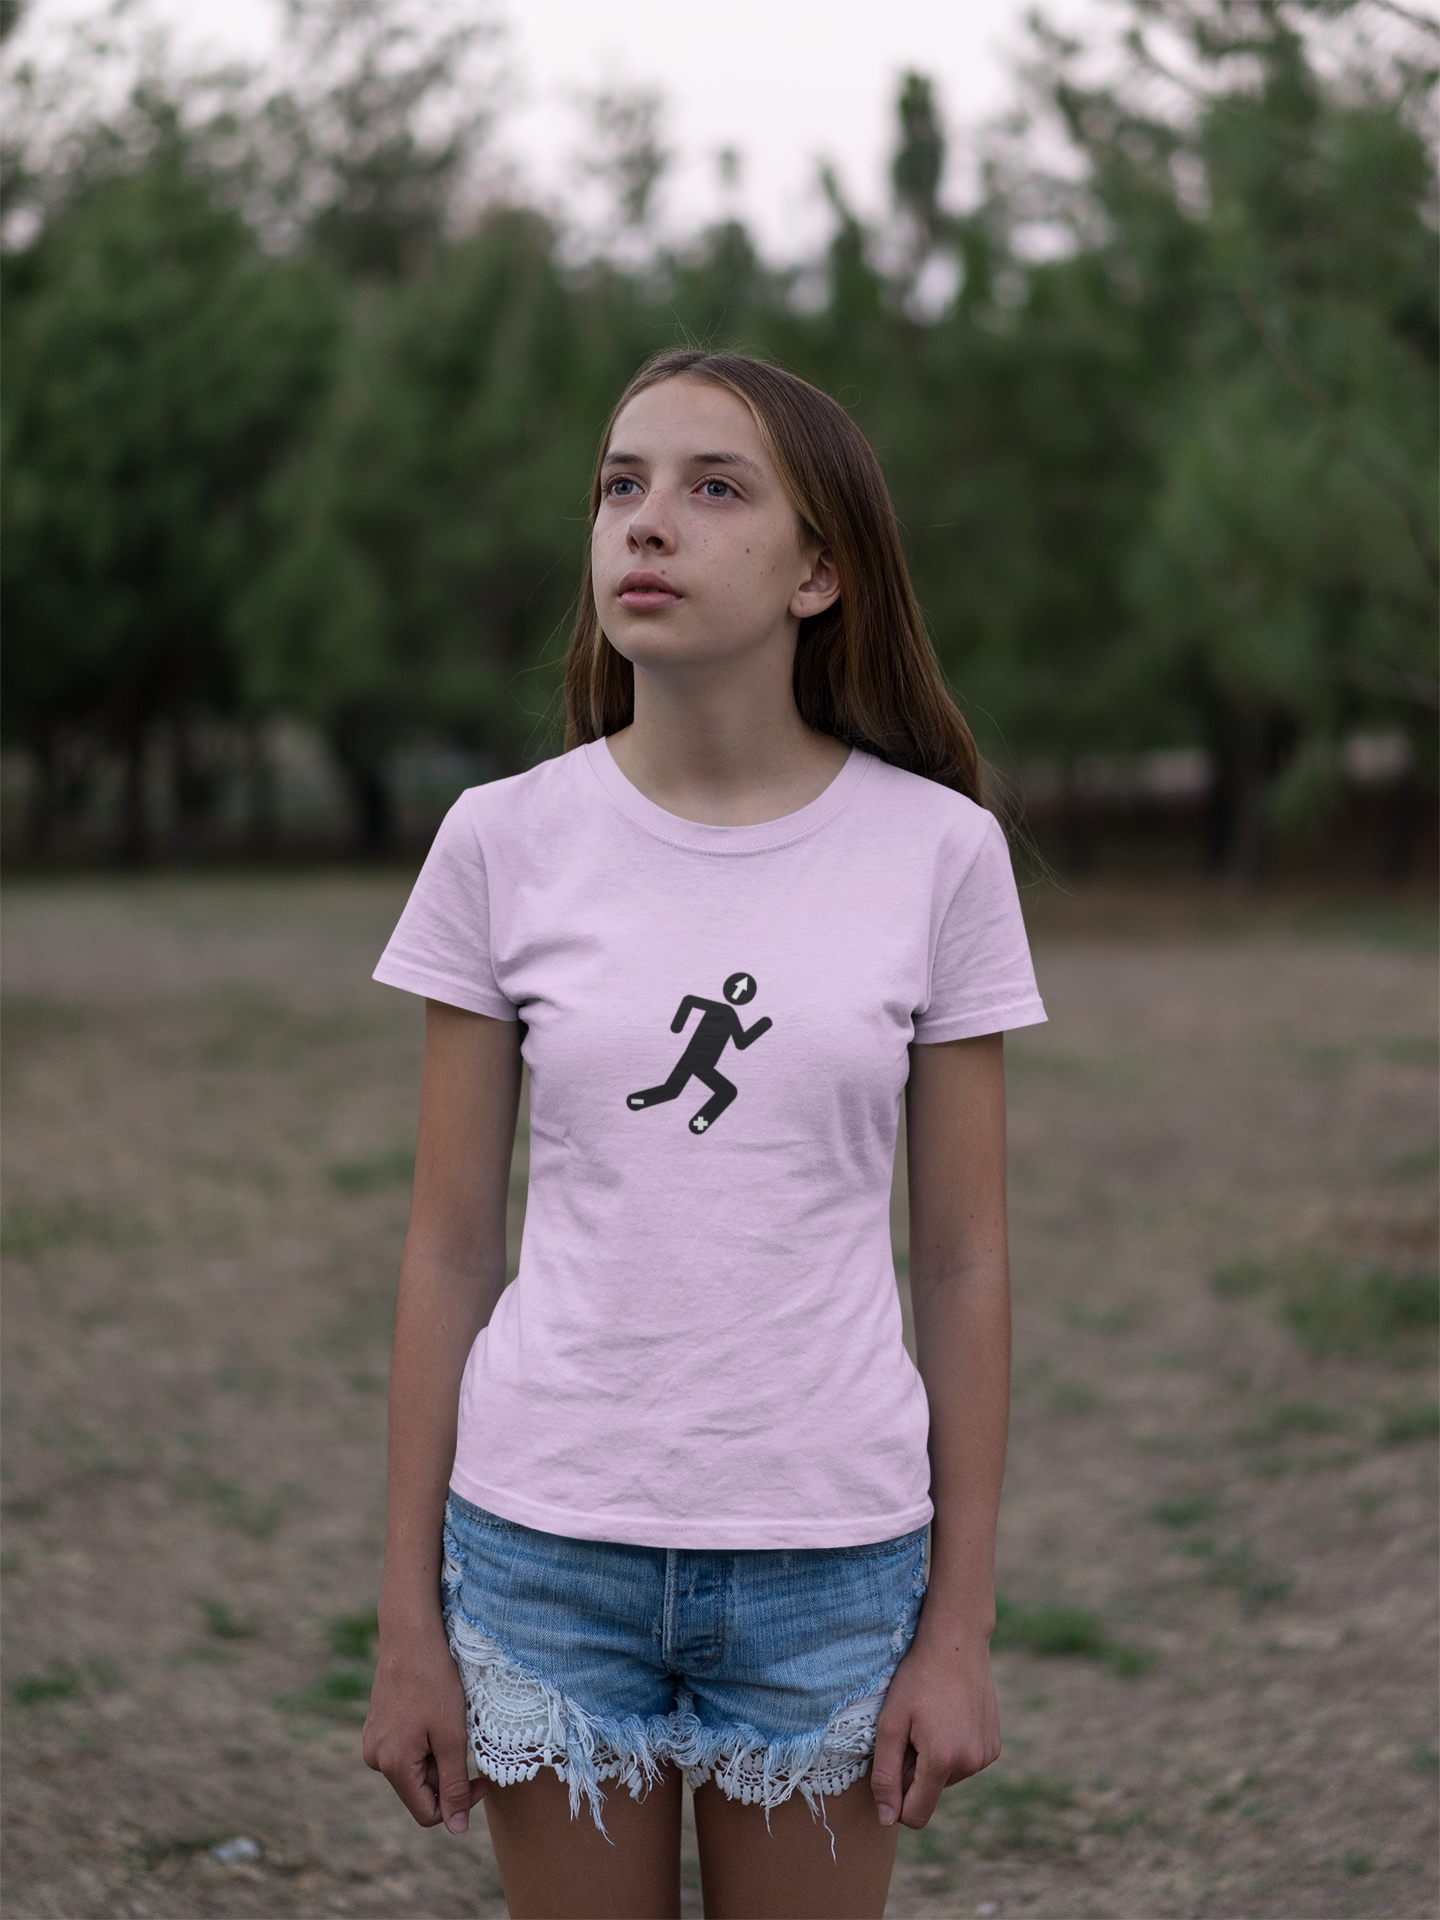 The Running One Youth T-shirt